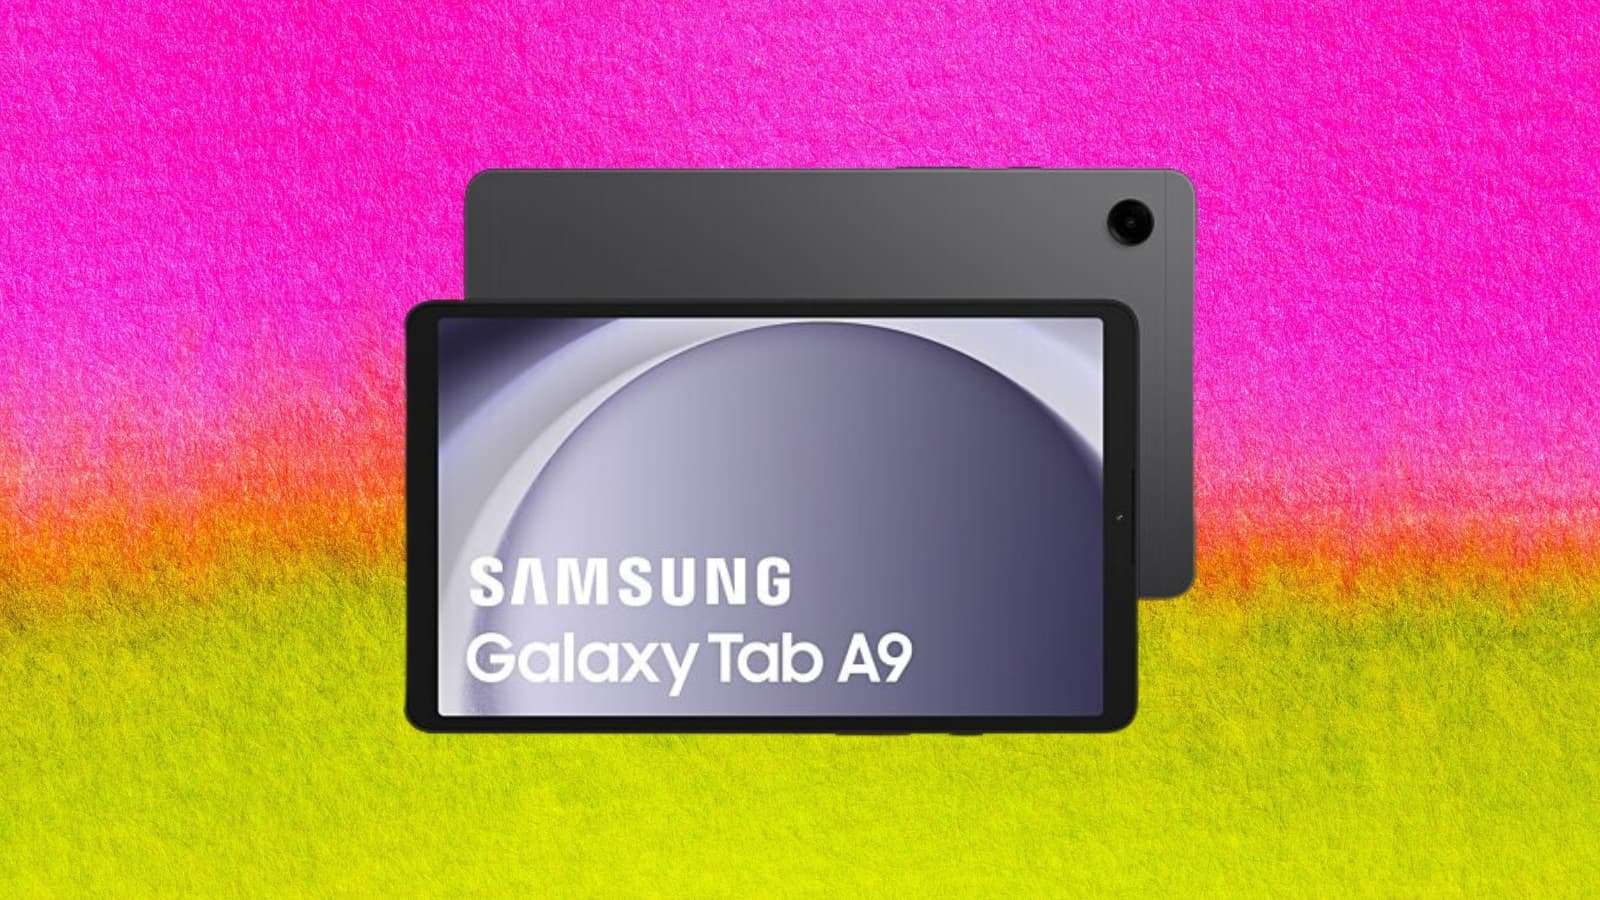 This Samsung tablet has a price of less than 200 euros and top-notch performance.